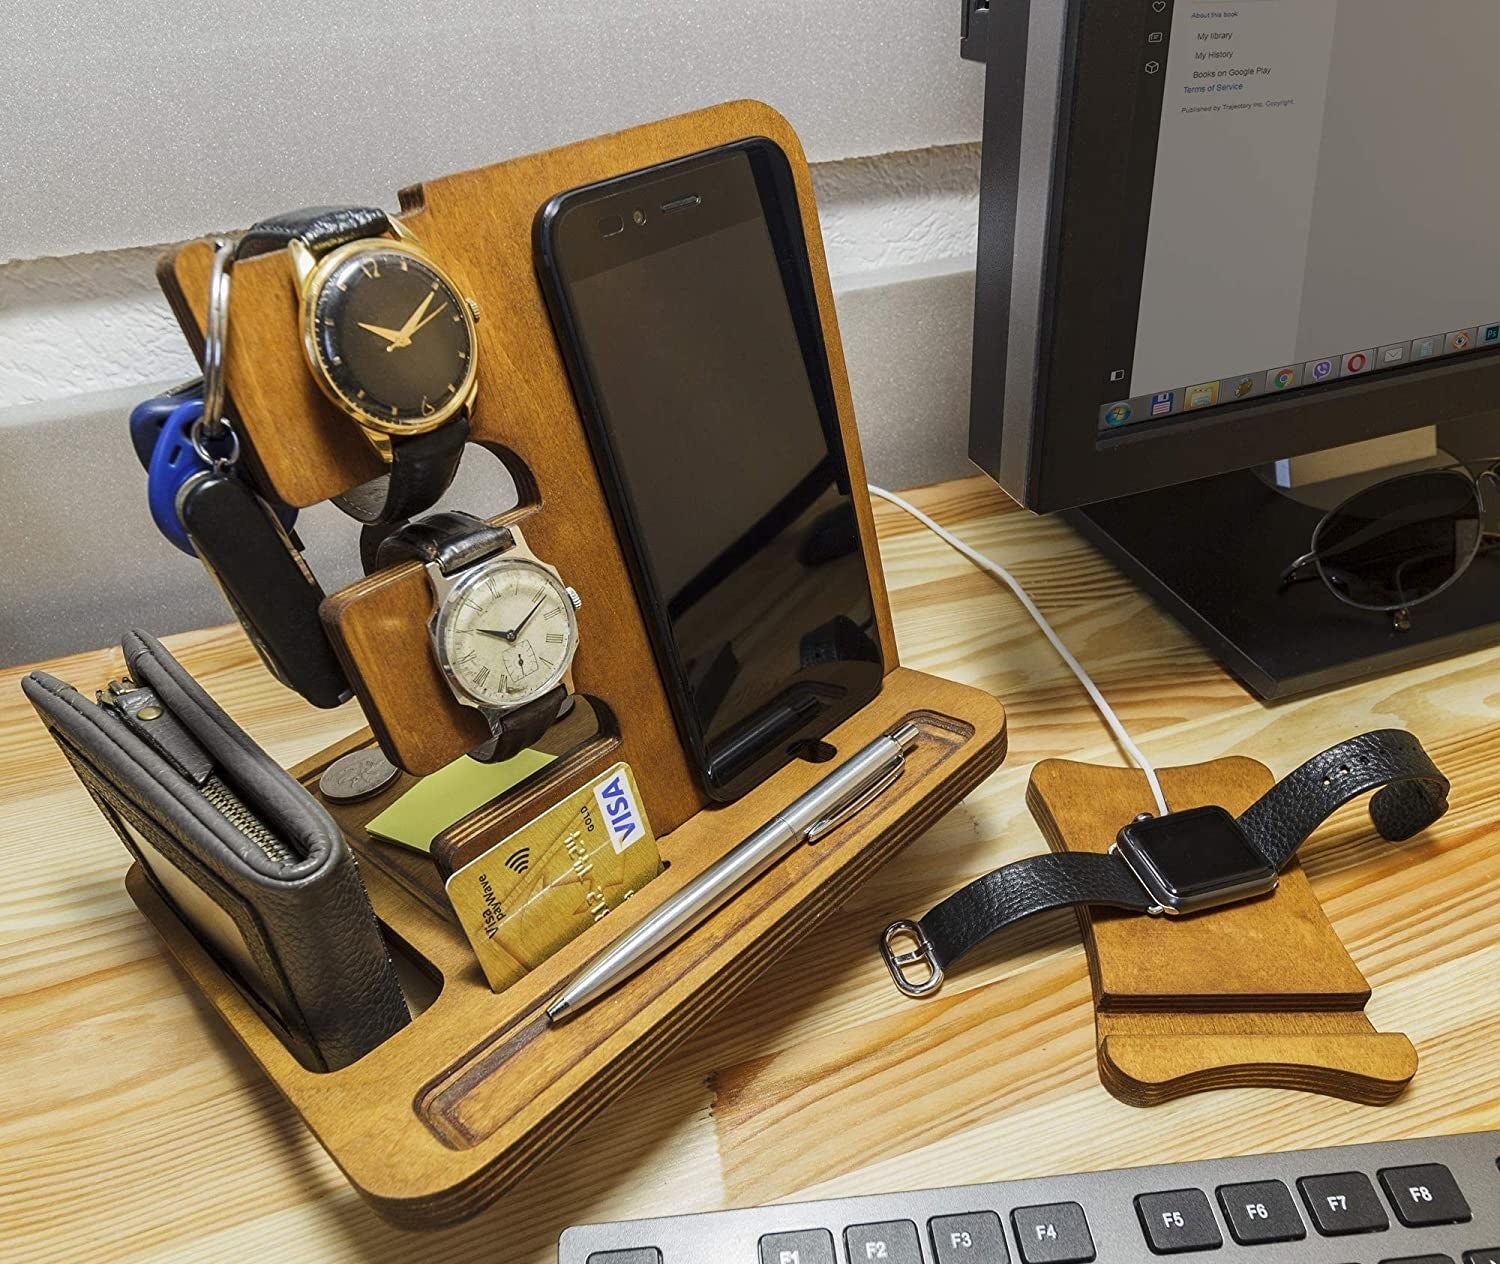 The docking station with a phone, wallet, watches, pen and credit card organized 